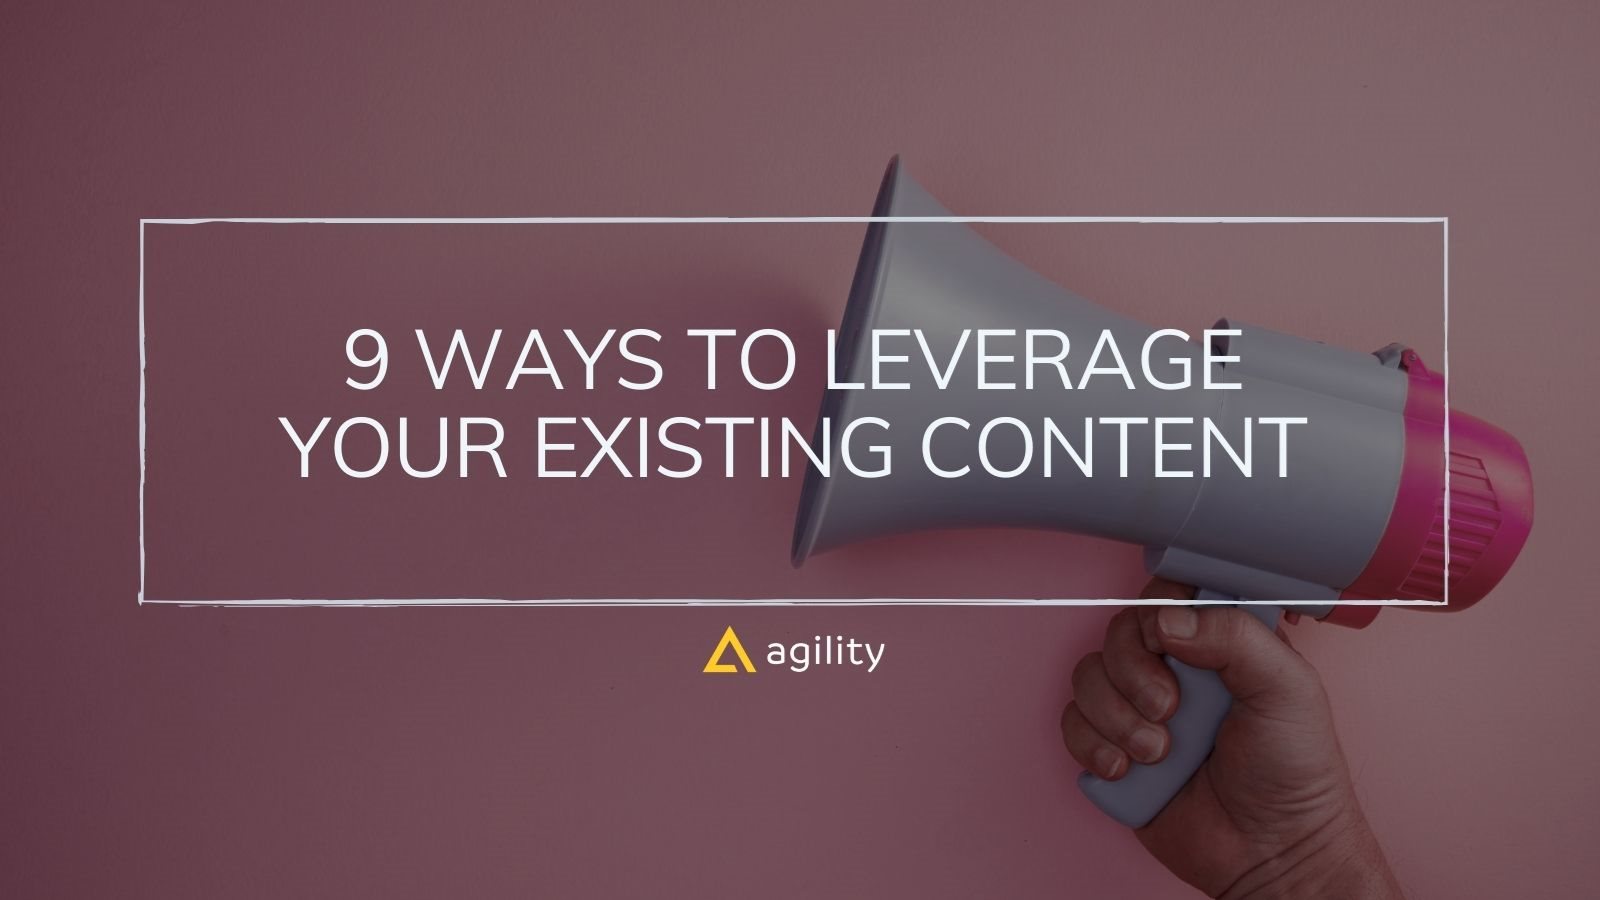 9 Ways to Leverage Your Existing Content